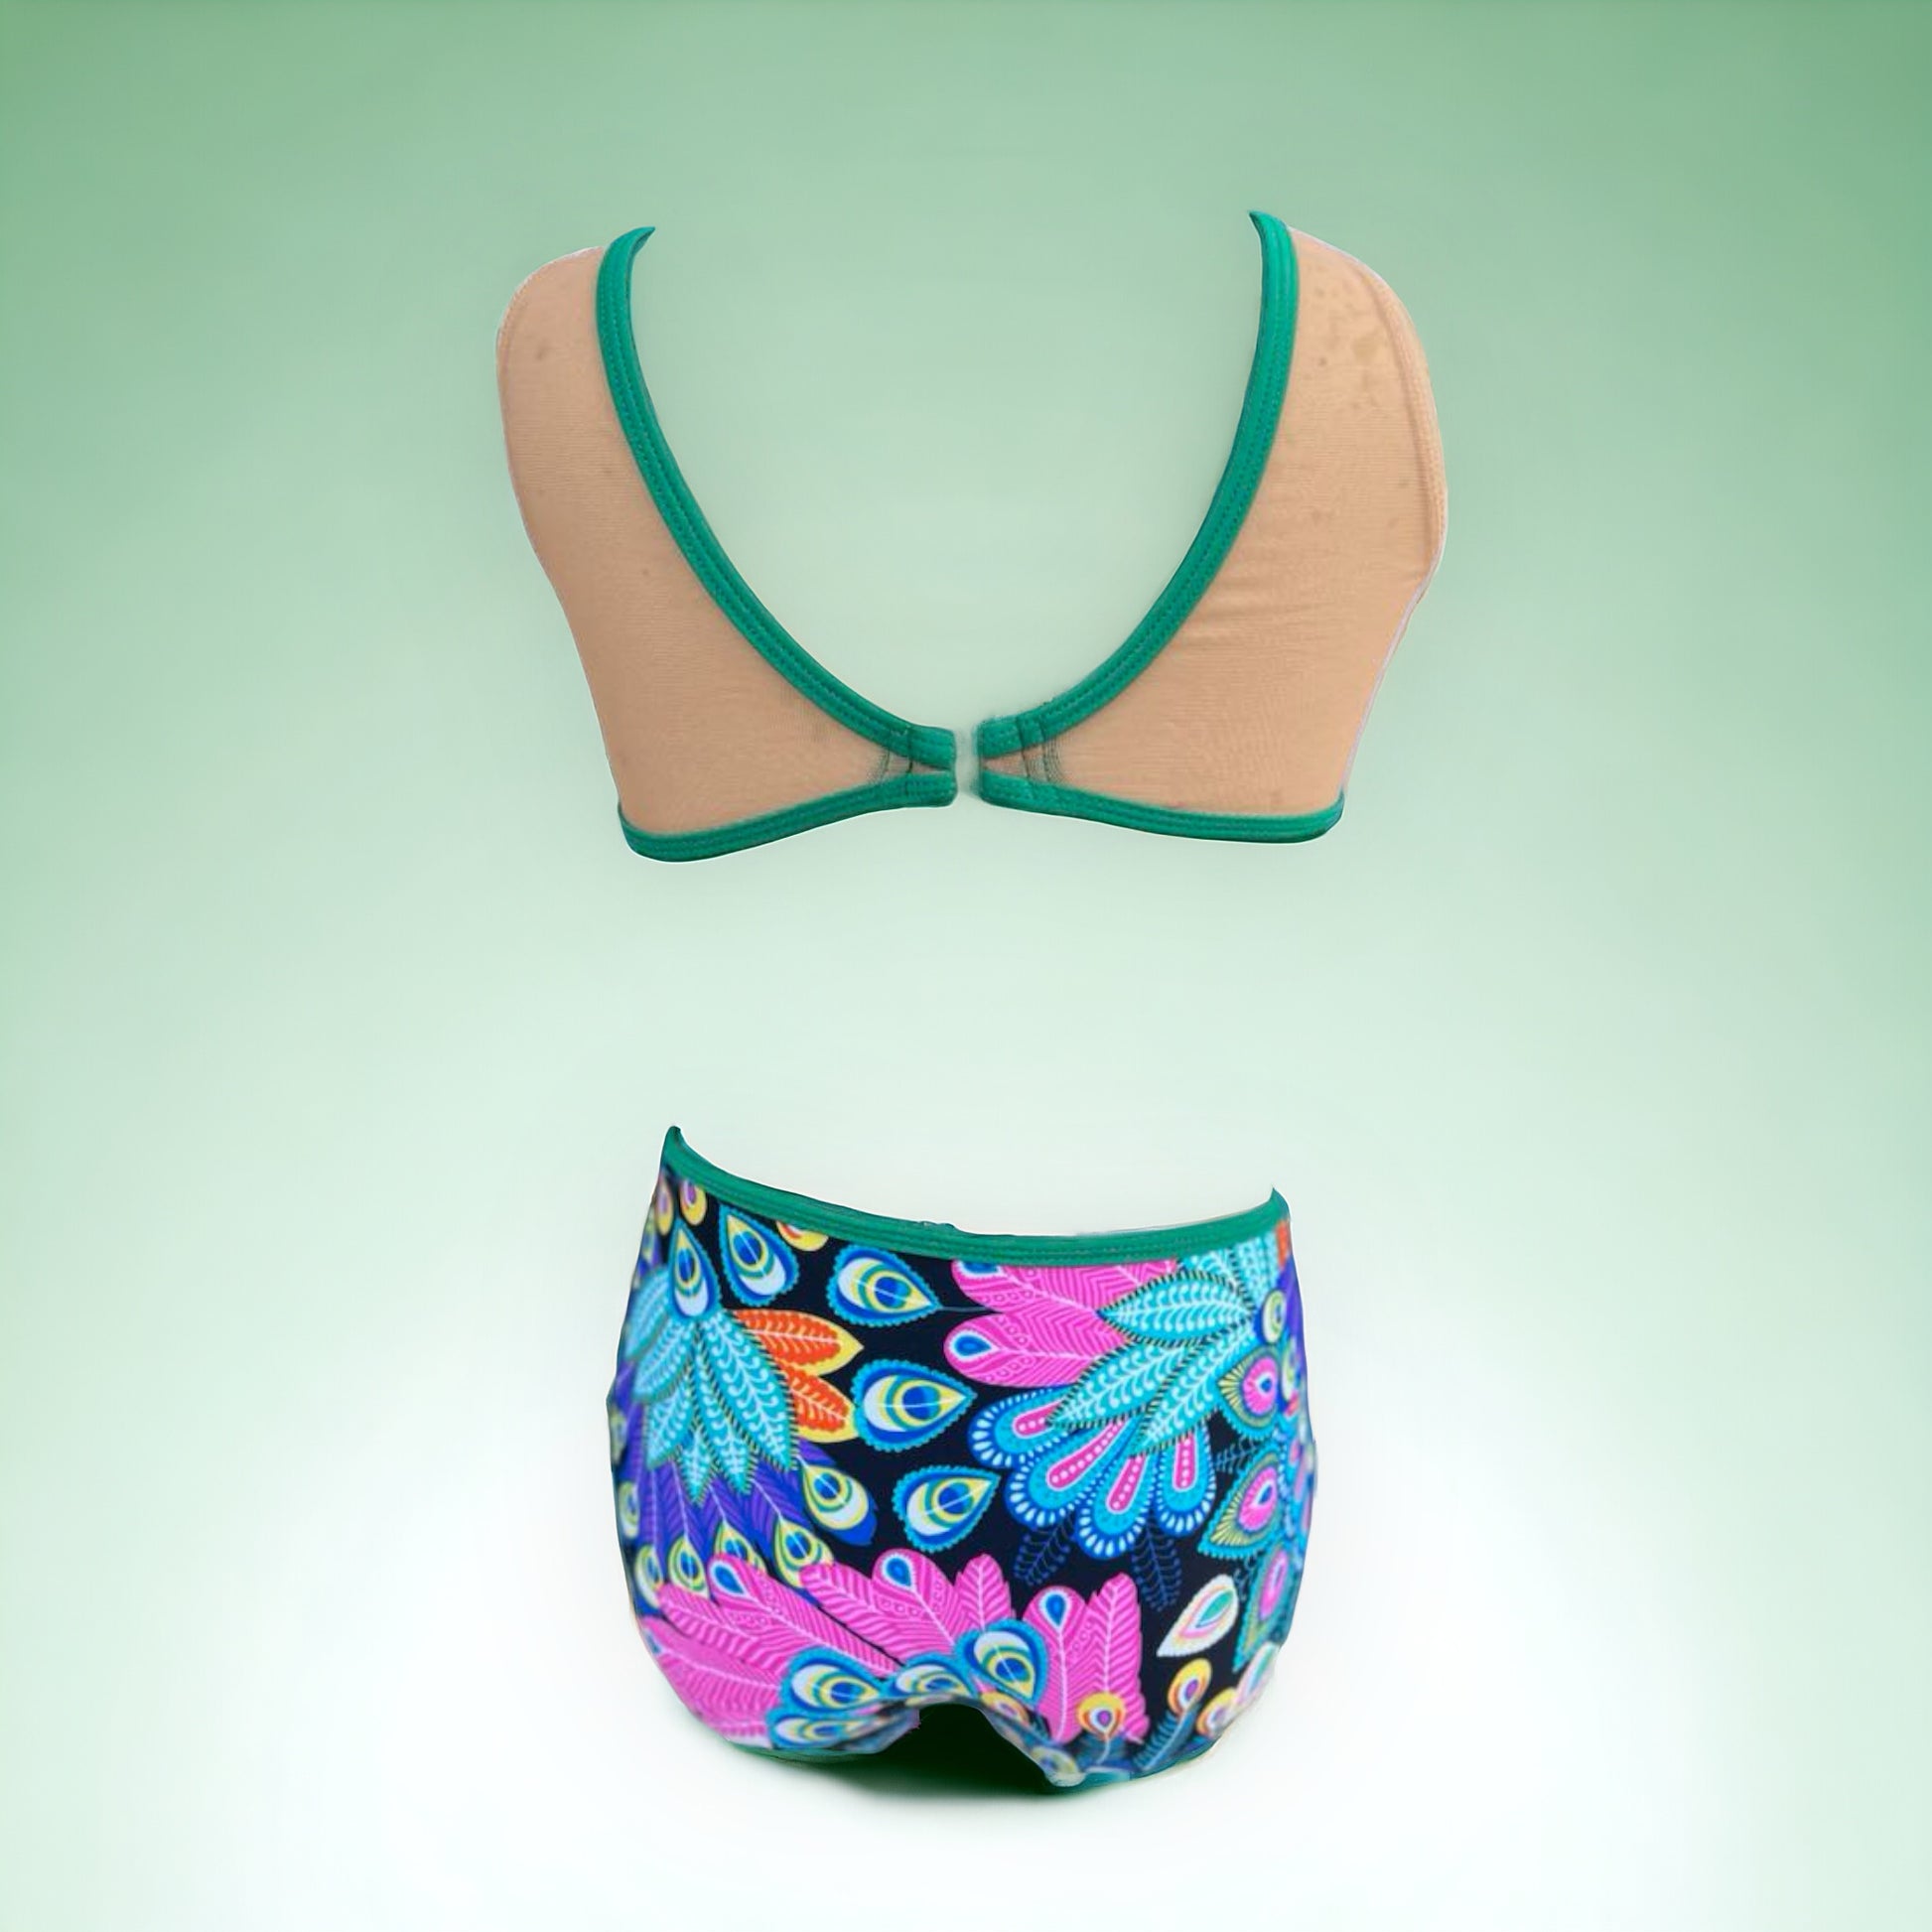 Gorgeous tropical paradise print with hues of yellows, greens, pinks, aquas, and blacks make a statement with our geometric cuts and strapwork in our Motion Leo. Only one... will it be yours?!